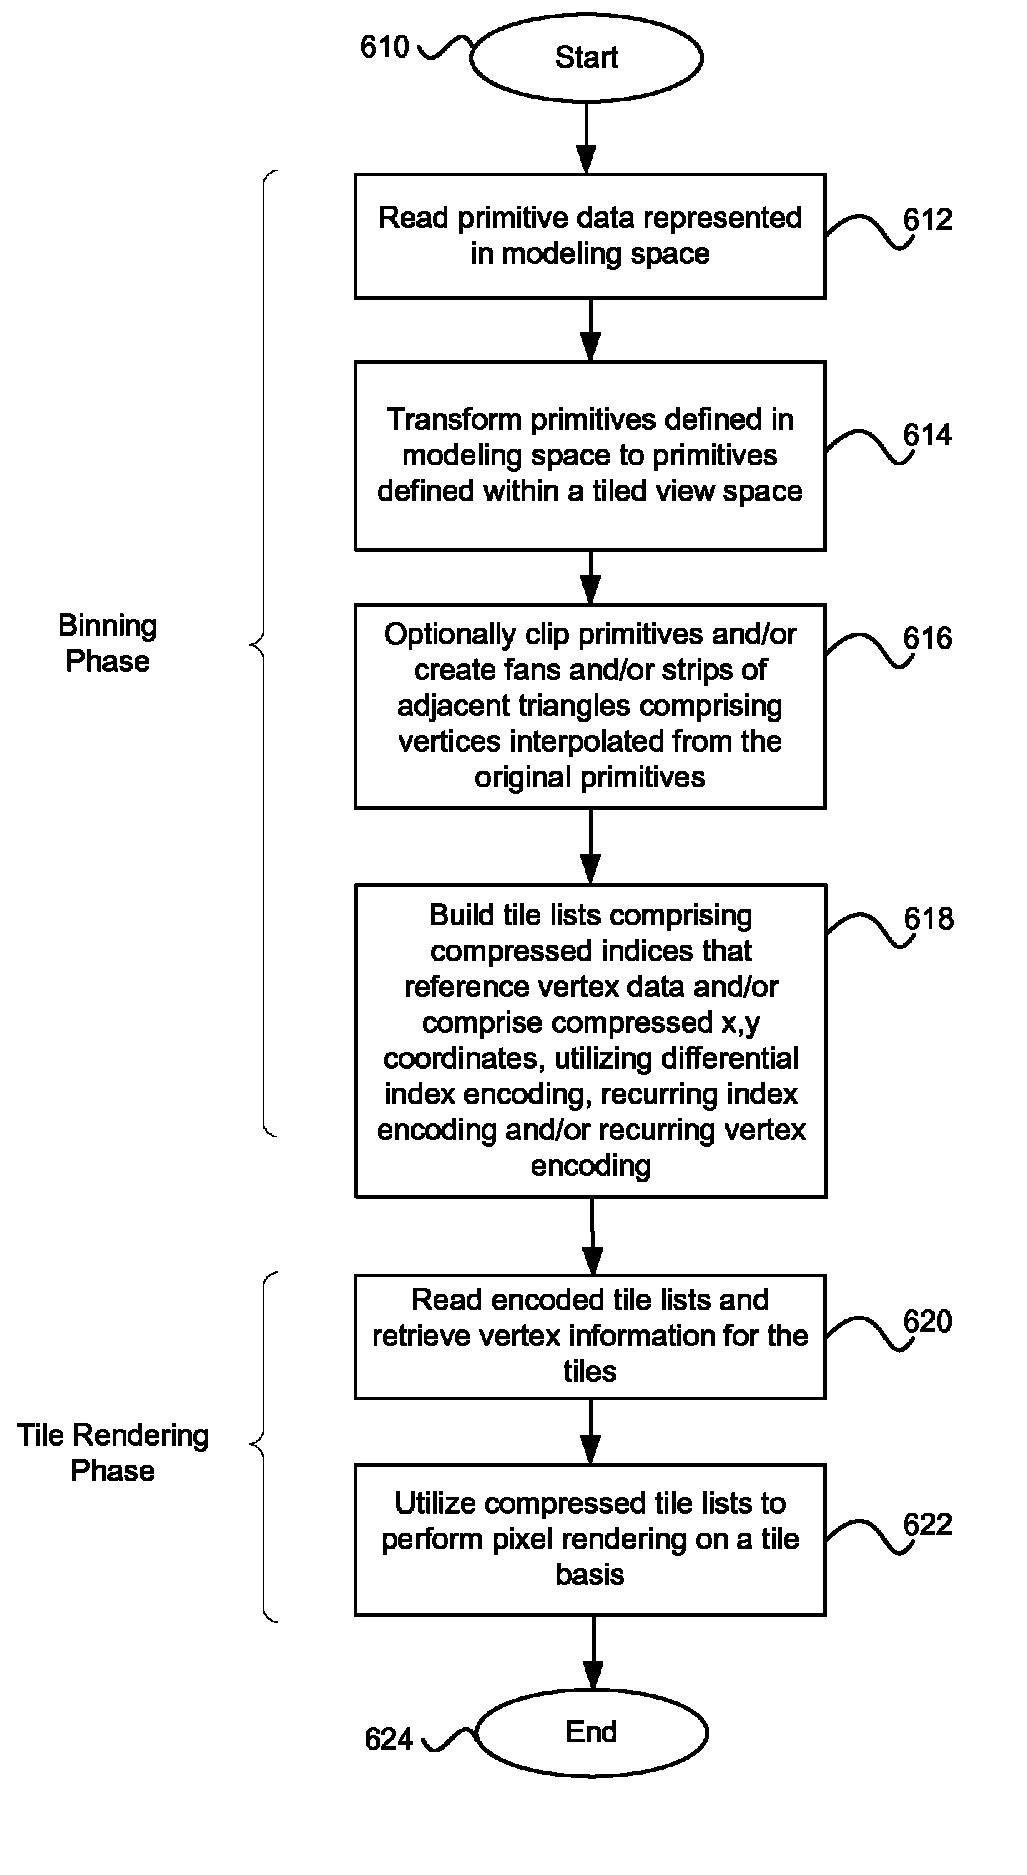 Method and system for compressing tile lists used for 3D rendering